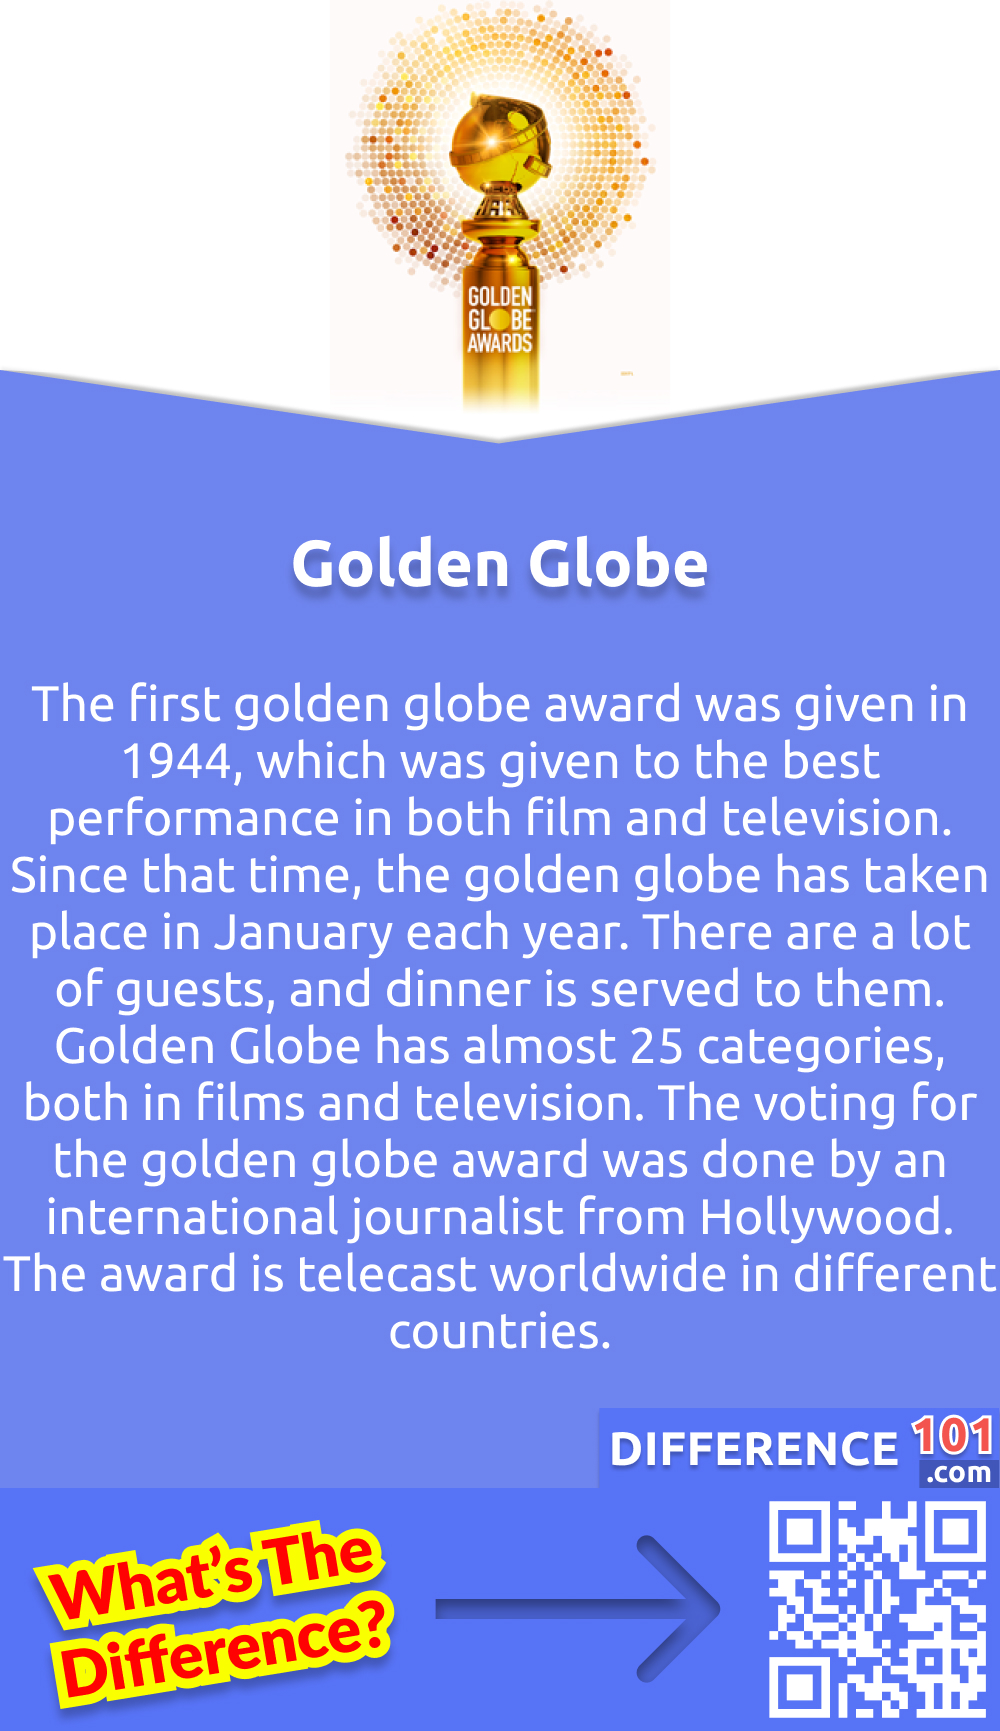 What Is the Golden Globe? The first golden globe award was given in 1944, which was given to the best performance in both film and television. Since that time, the golden globe has taken place in January each year. There are a lot of guests, and dinner is served to them. Golden Globe has almost 25 categories, both in films and television. The voting for the golden globe award was done by an international journalist from Hollywood. The award is telecast worldwide in different countries.